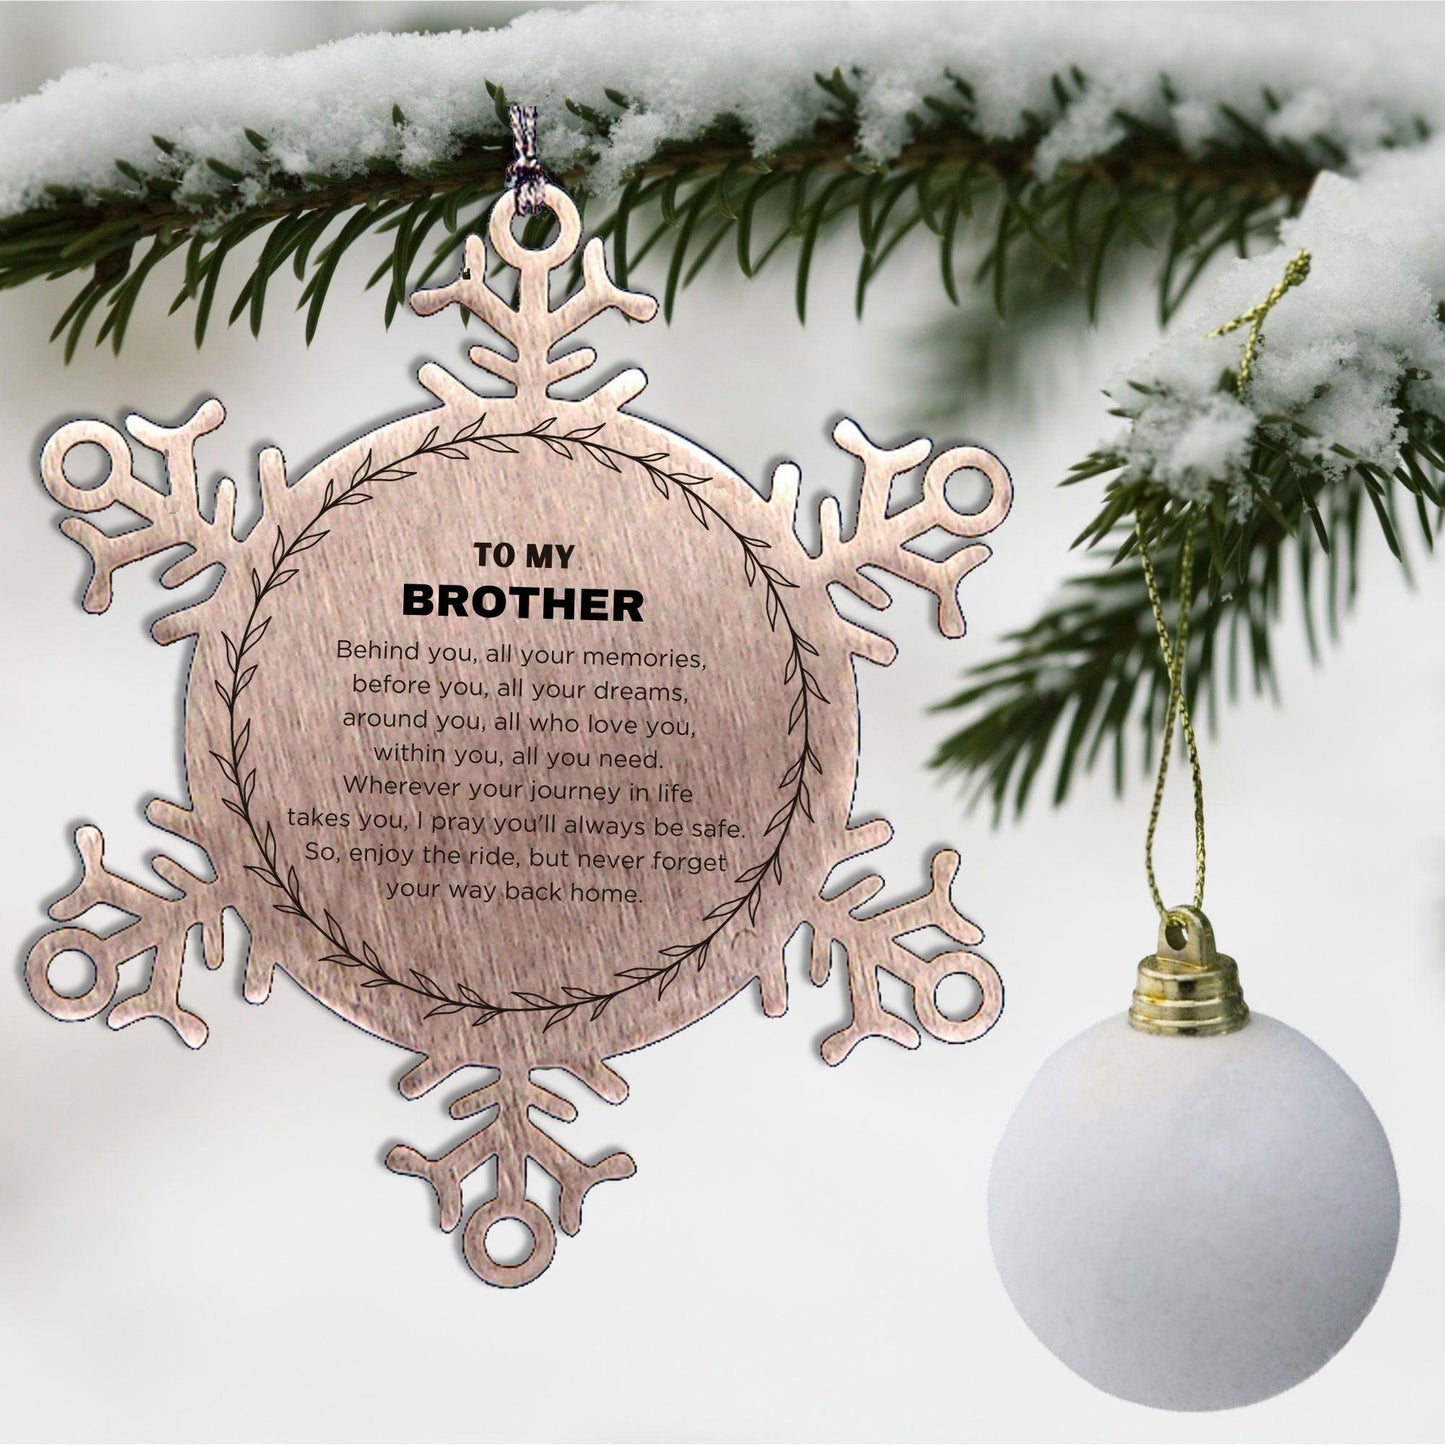 Inspirational Brother Snowflake Ornament - Behind you, all your Memories, Before you, all your Dreams - Birthday, Christmas Holiday Gifts - Mallard Moon Gift Shop